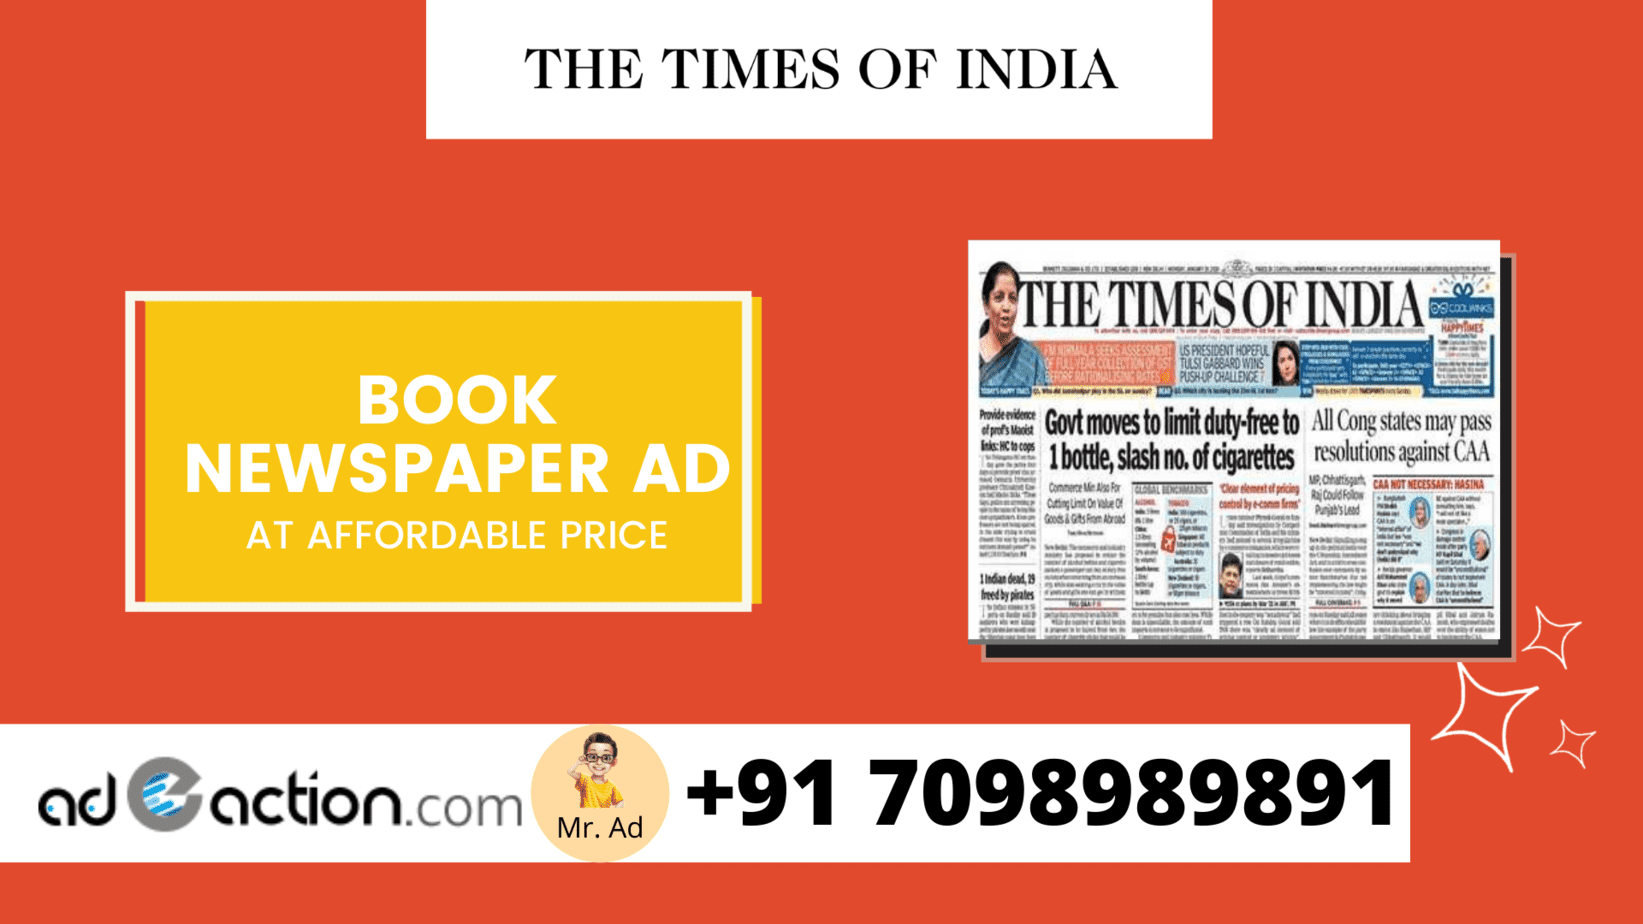 book newspaper ad in the times of india nwspaper